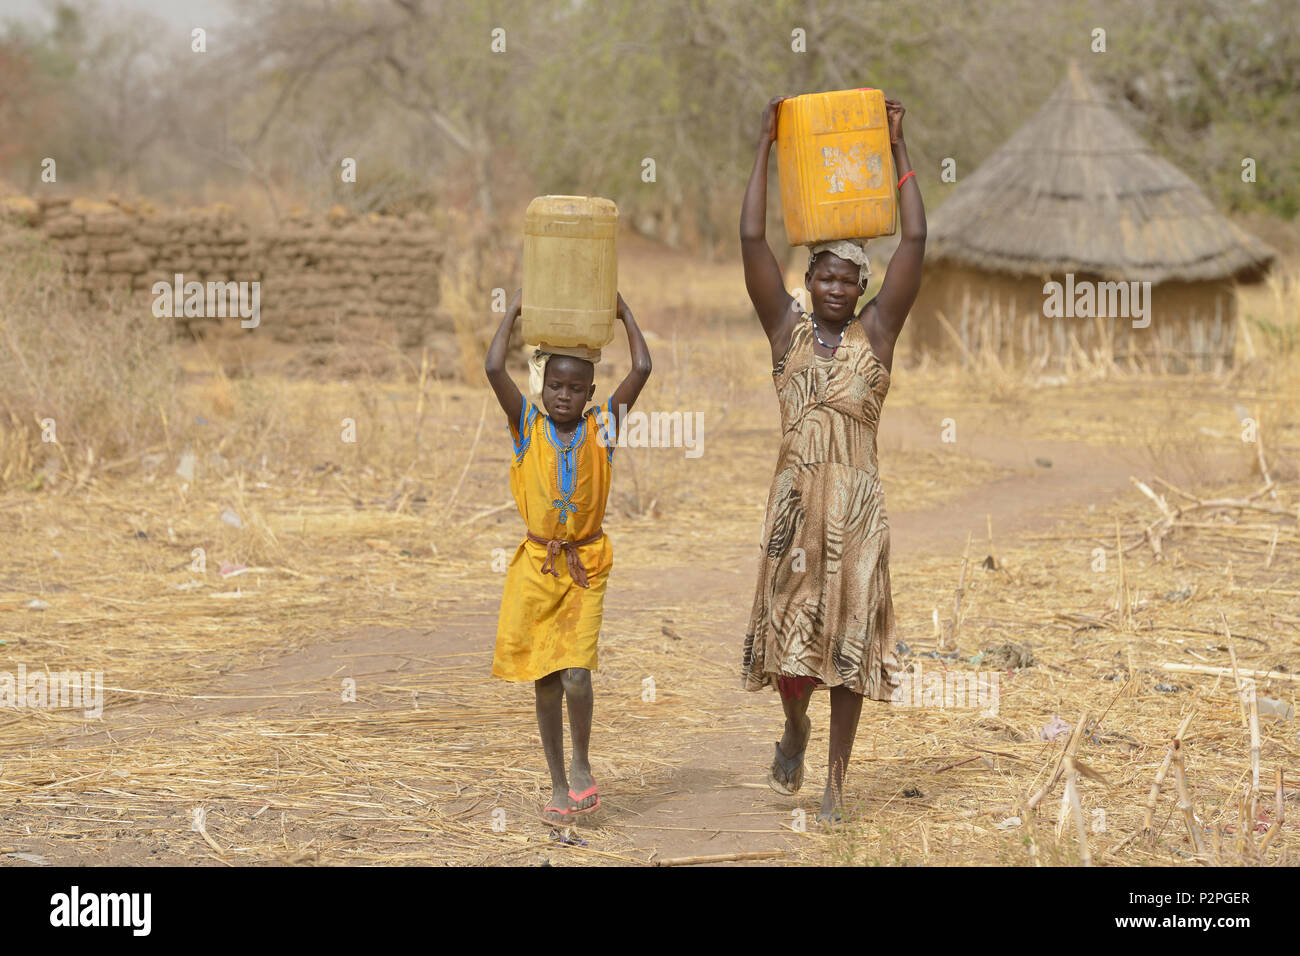 With help from her 8-year old daughter Atap, Atouc Dut carries home water from a well in Malek Miir, a village in South Sudan's Lol State. Stock Photo